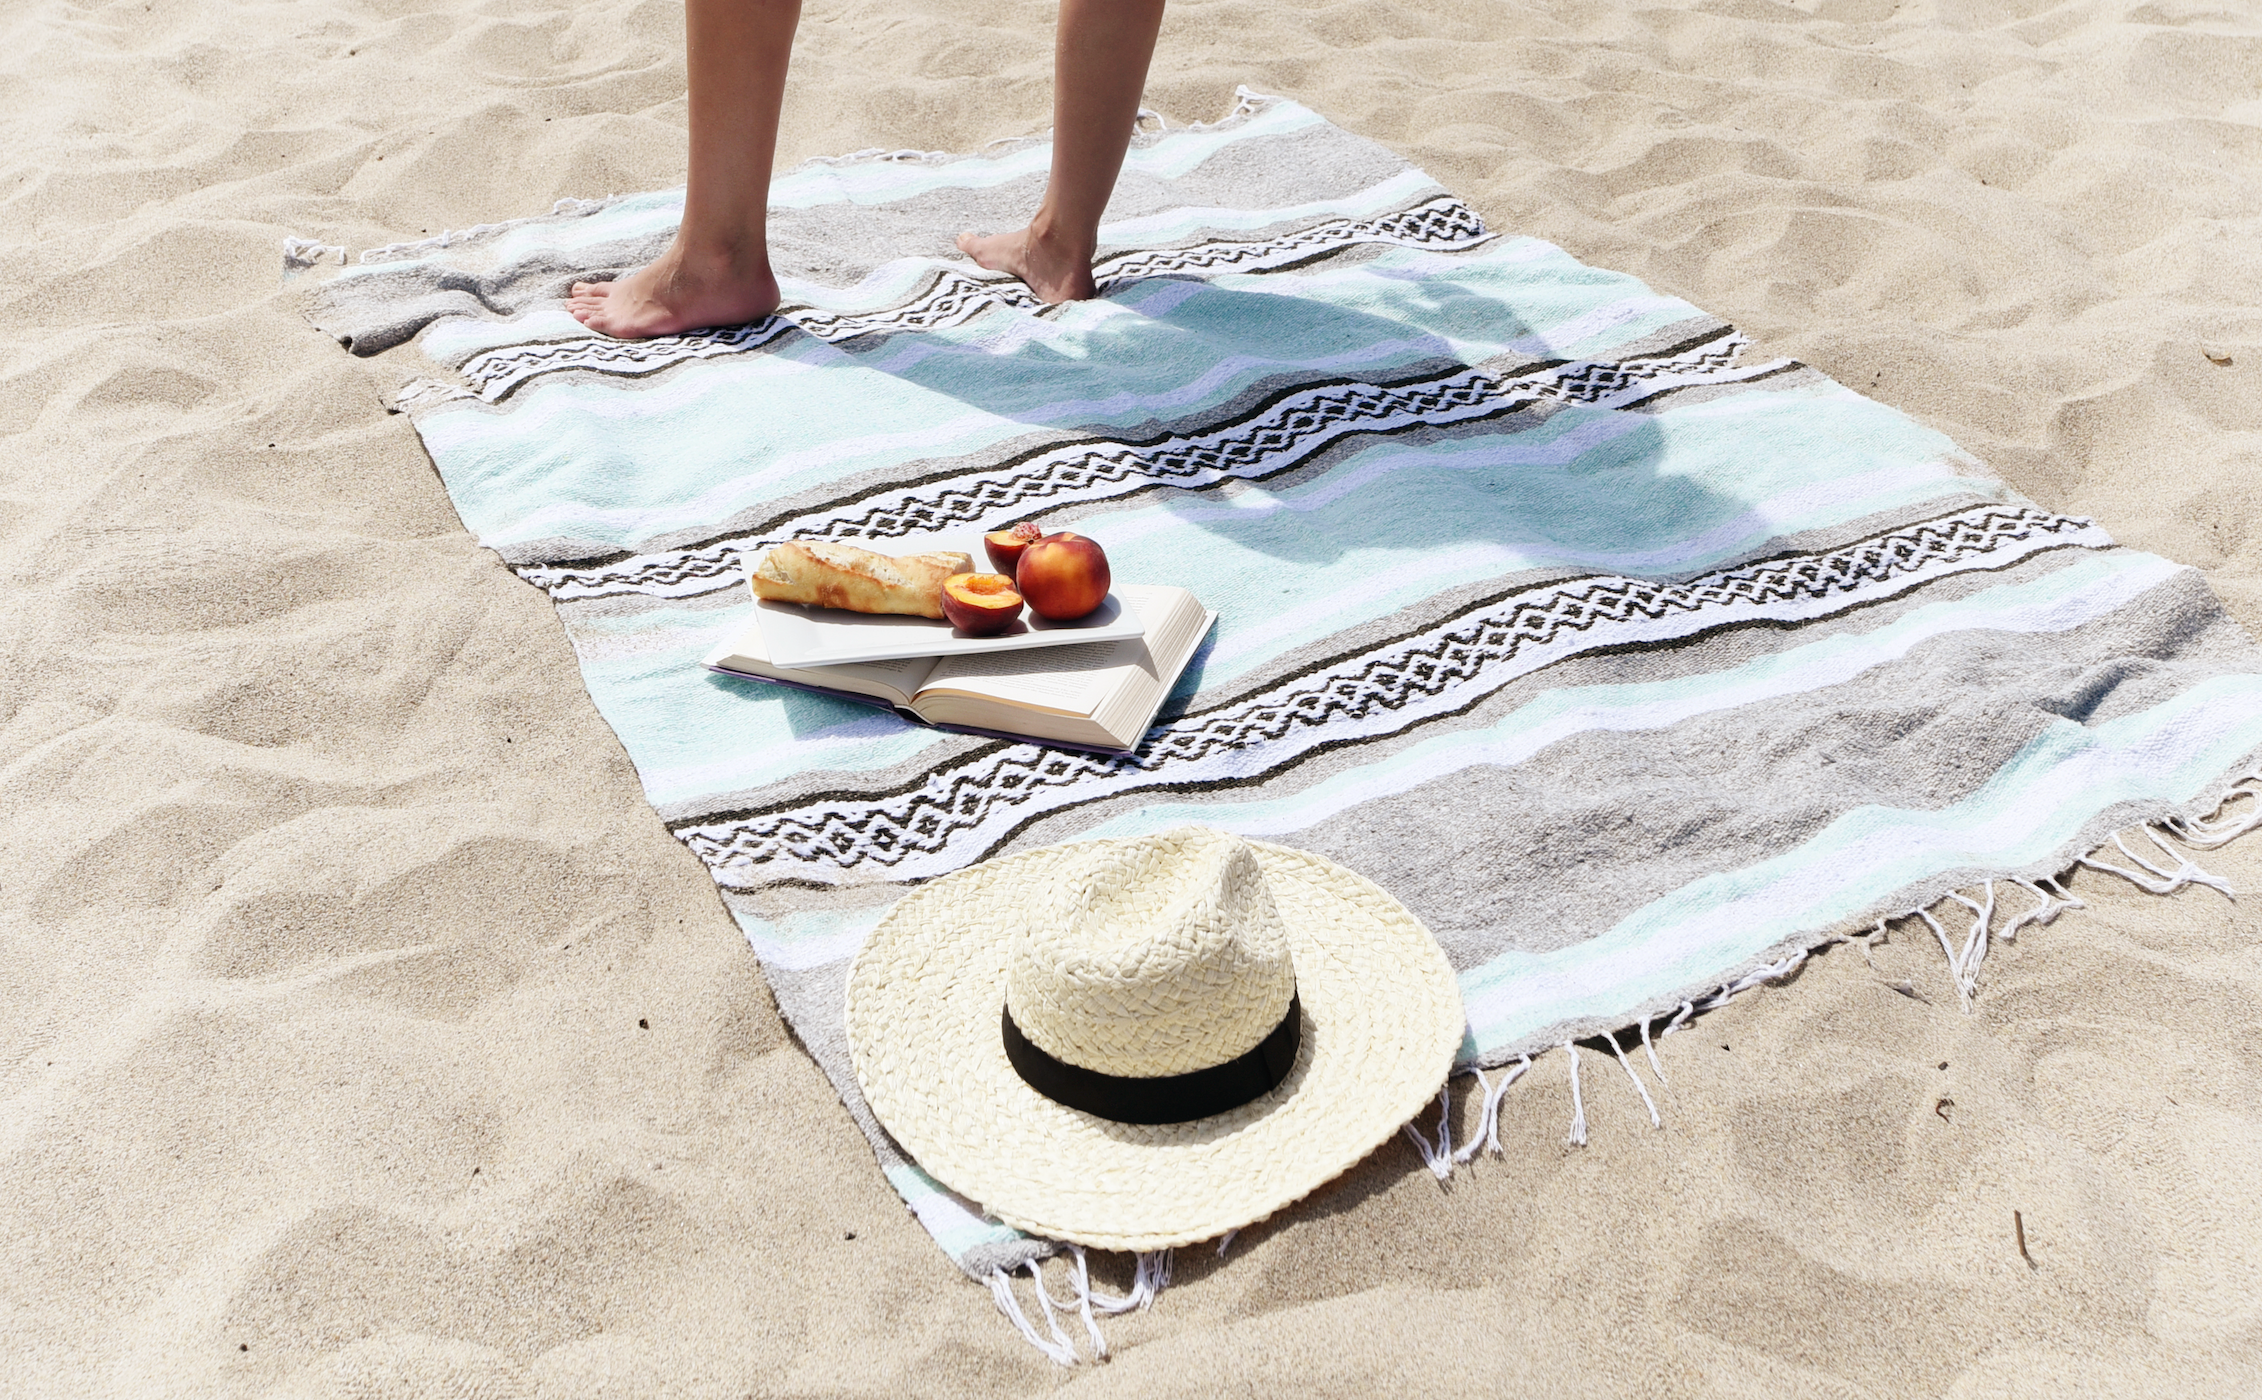 A Mexican blanket laid on the sand with a hat, book, and a woman's leg standing on top.